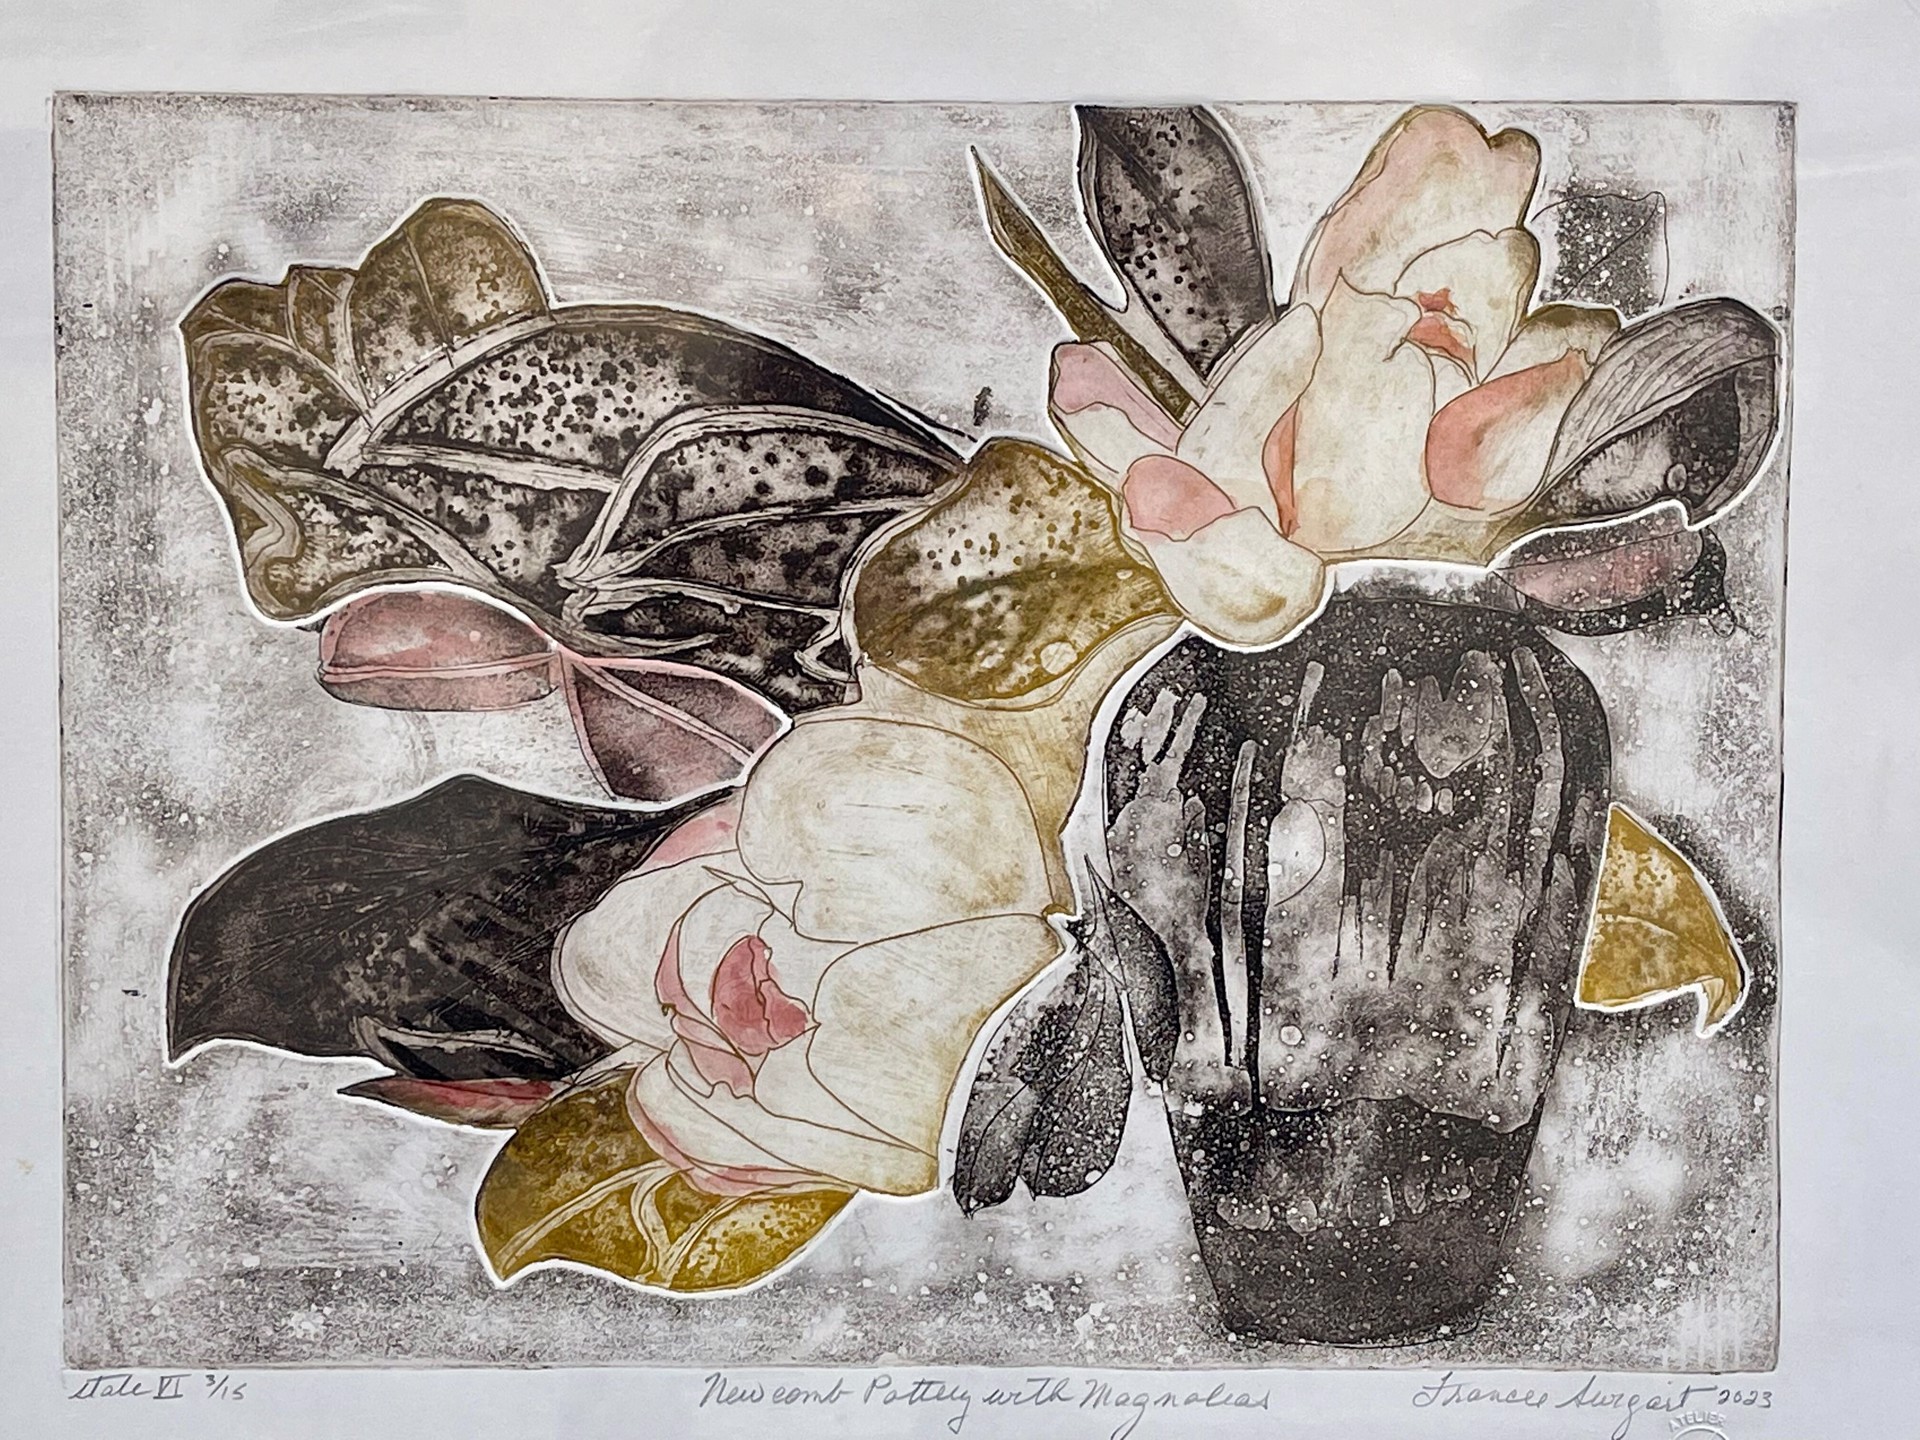 Newcomb Pottery with Magnolias by Frances Swigart